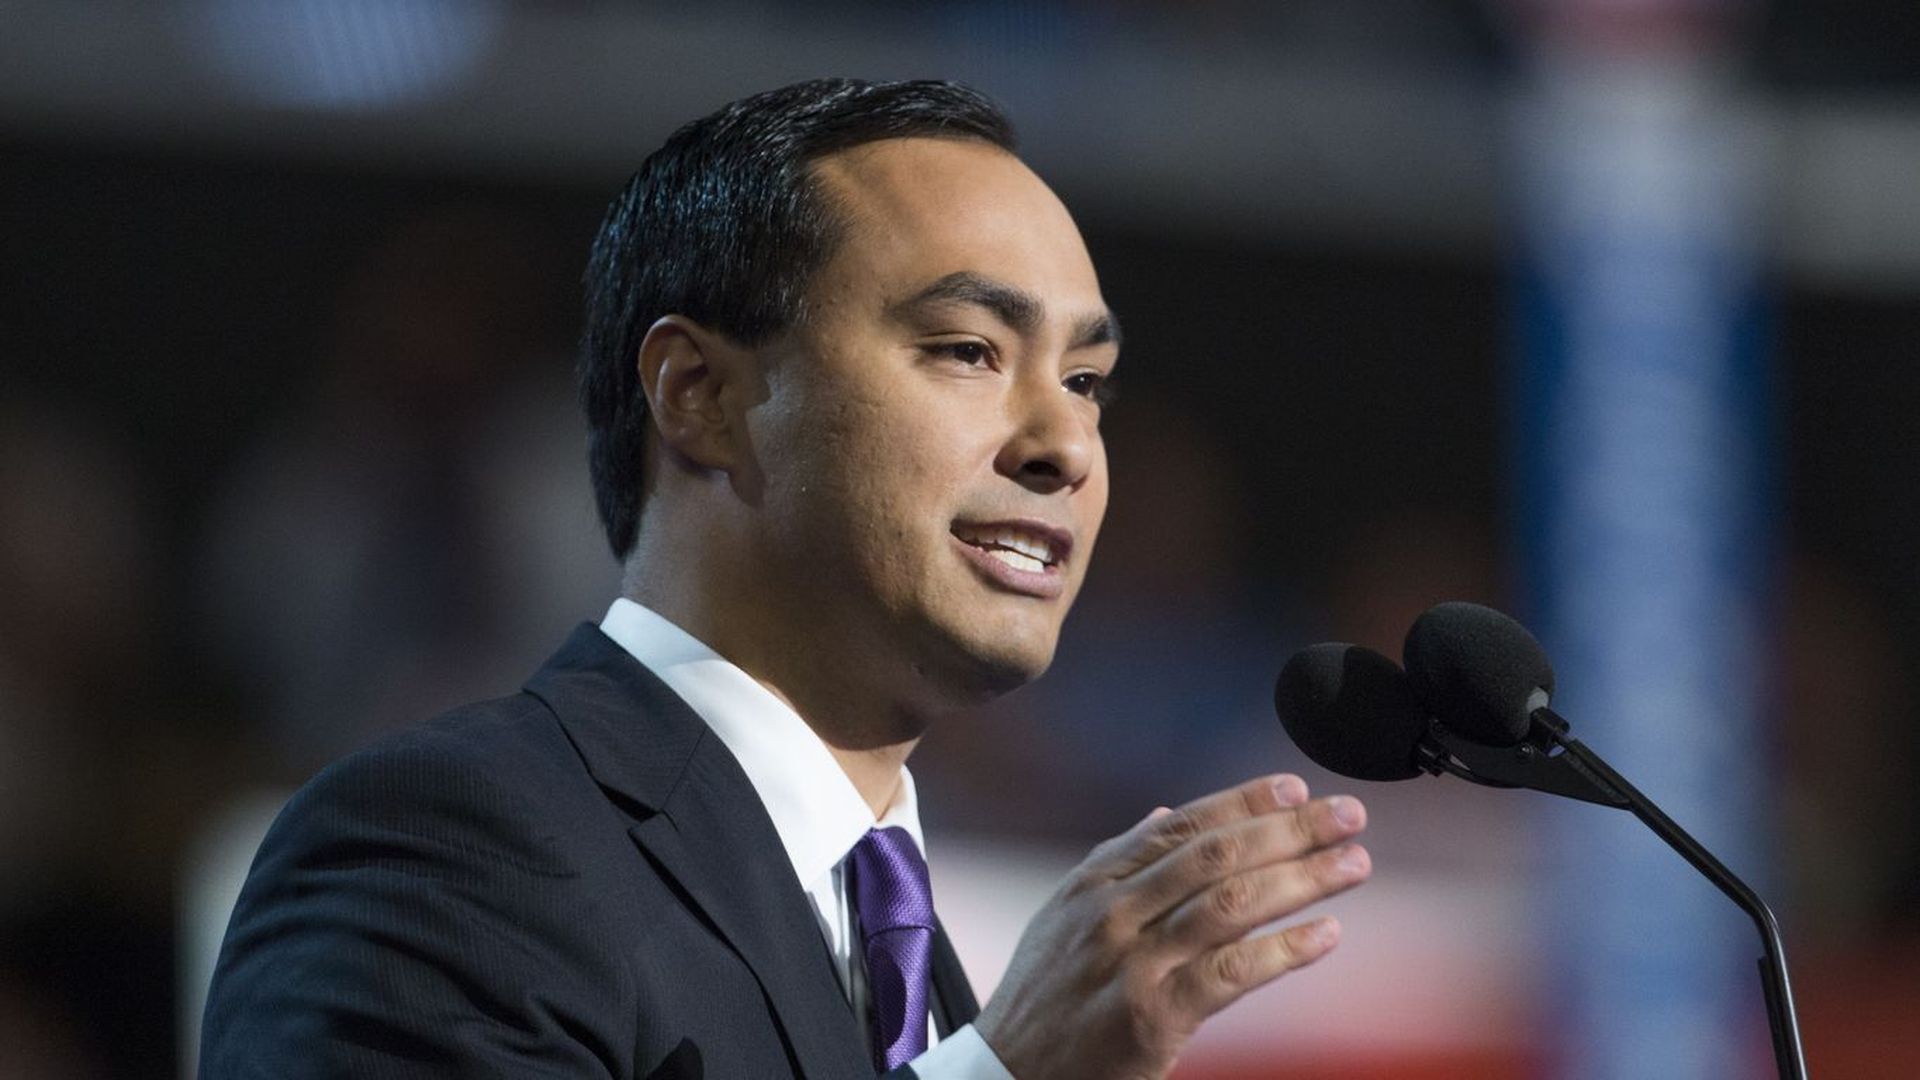 U.S. Rep. Joaquin Castro holds one hand up as he speaks in front of a microphone